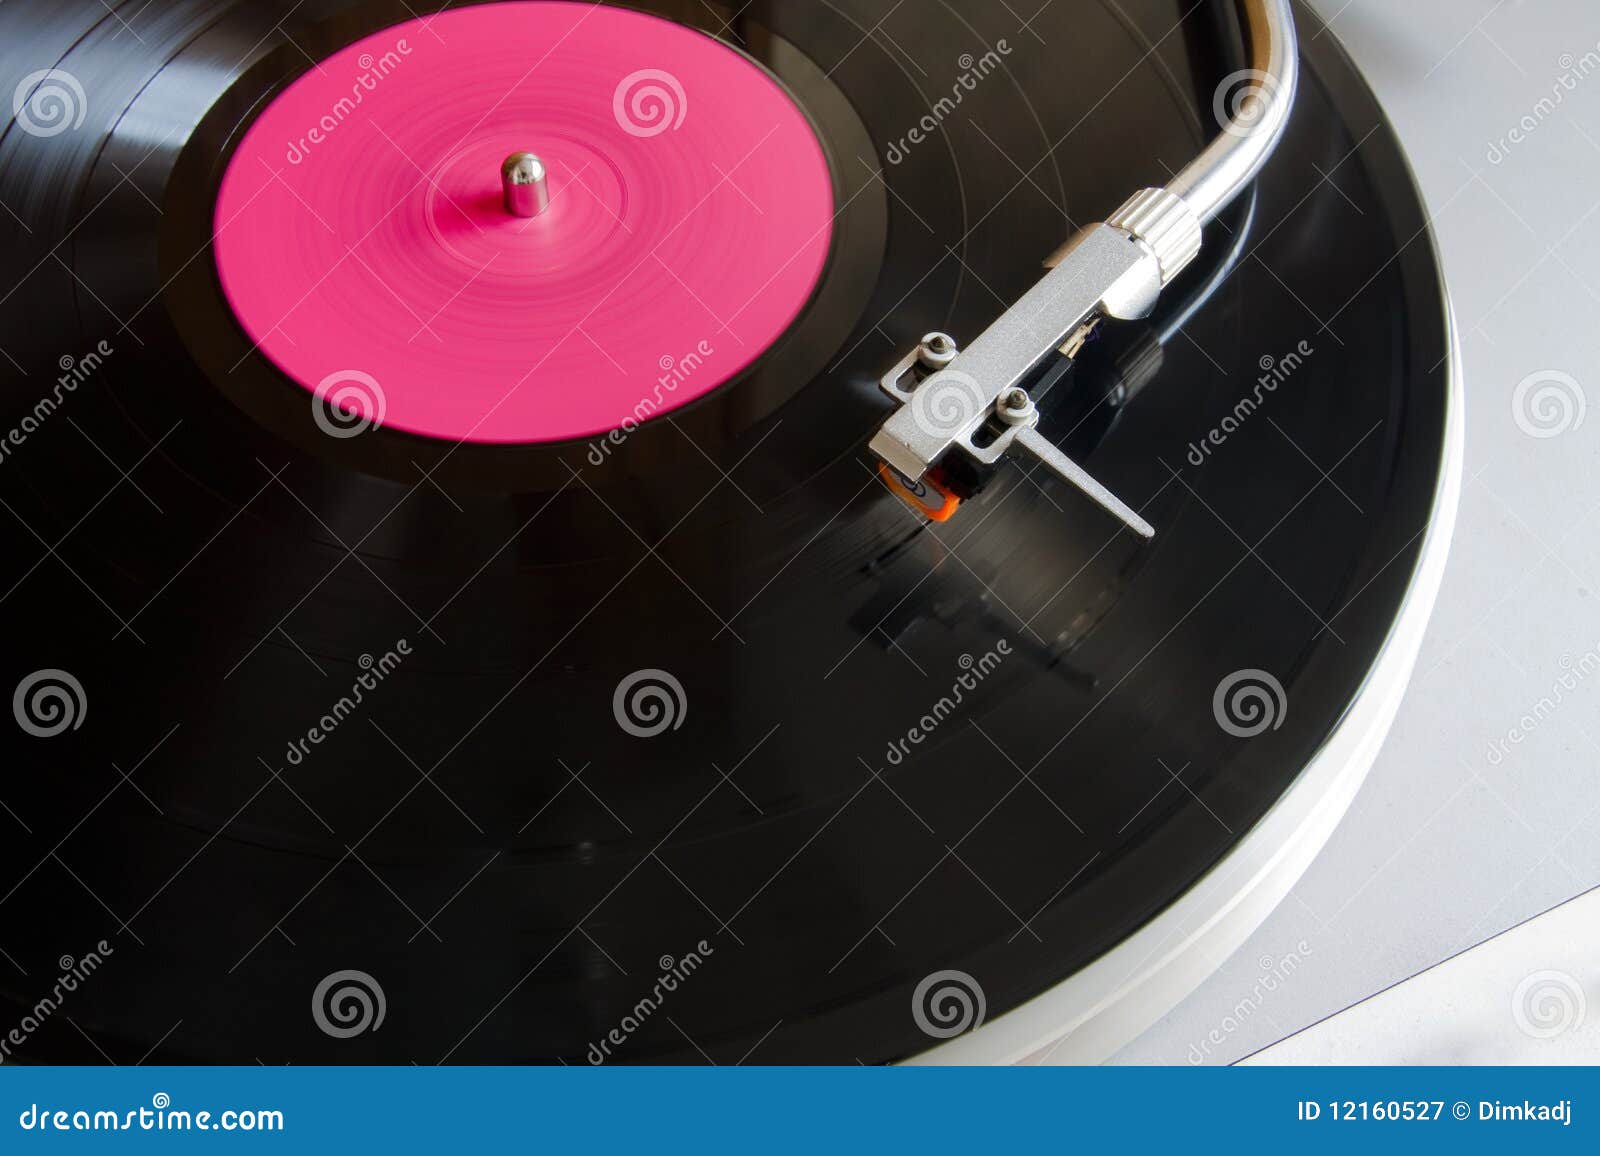 The vinyl player stock image. Image of plays, black, music - 12160527